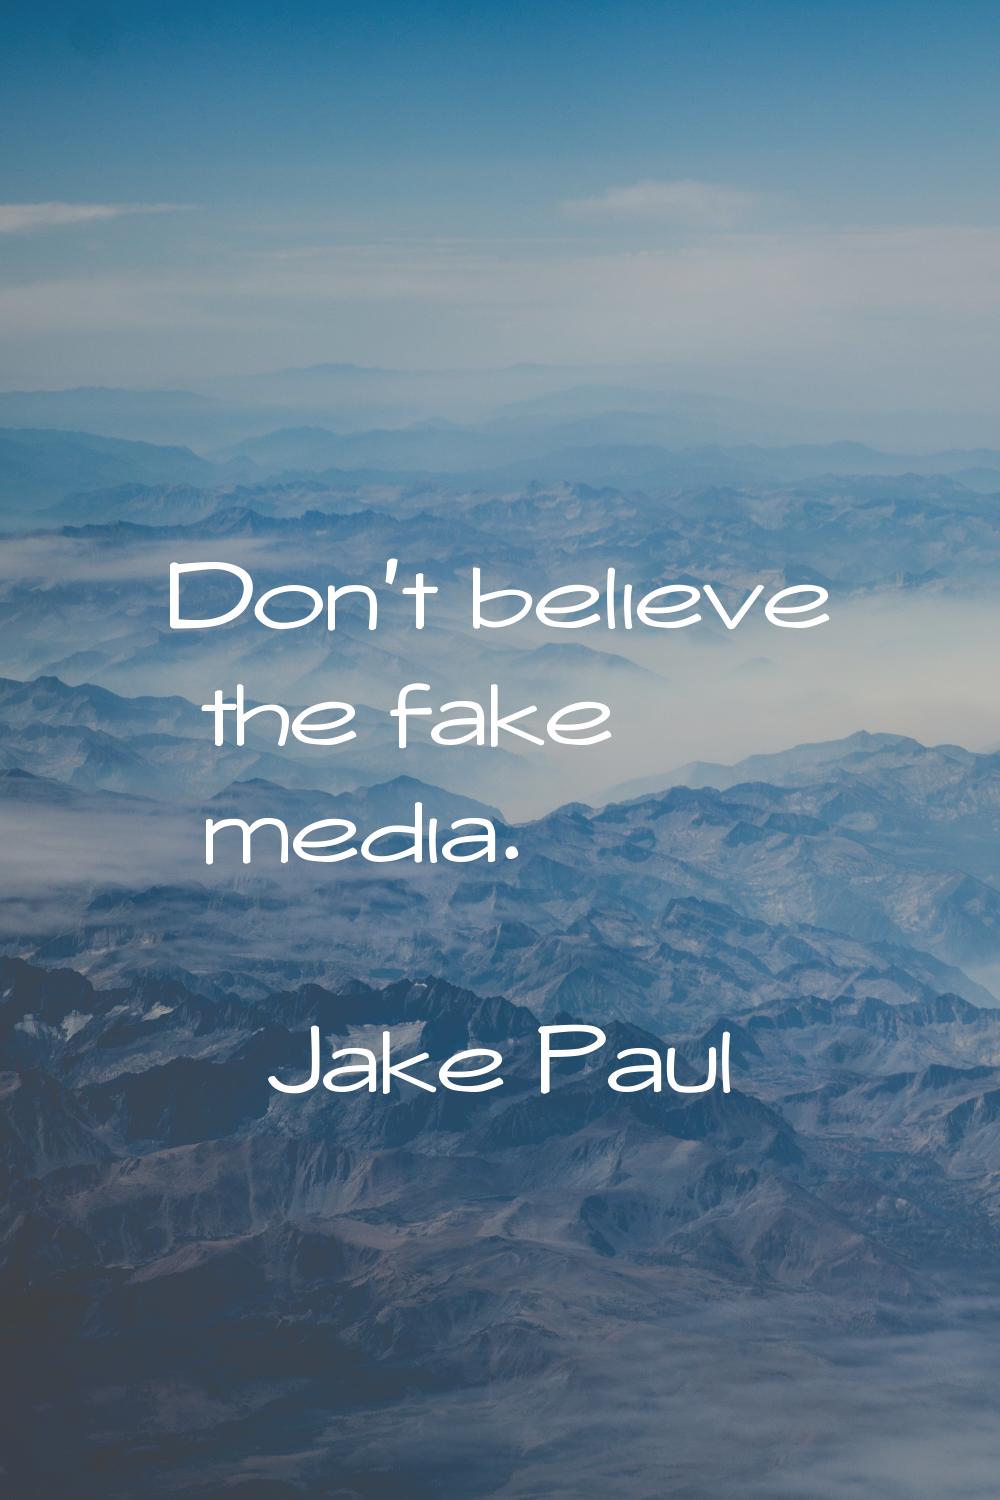 Don't believe the fake media.